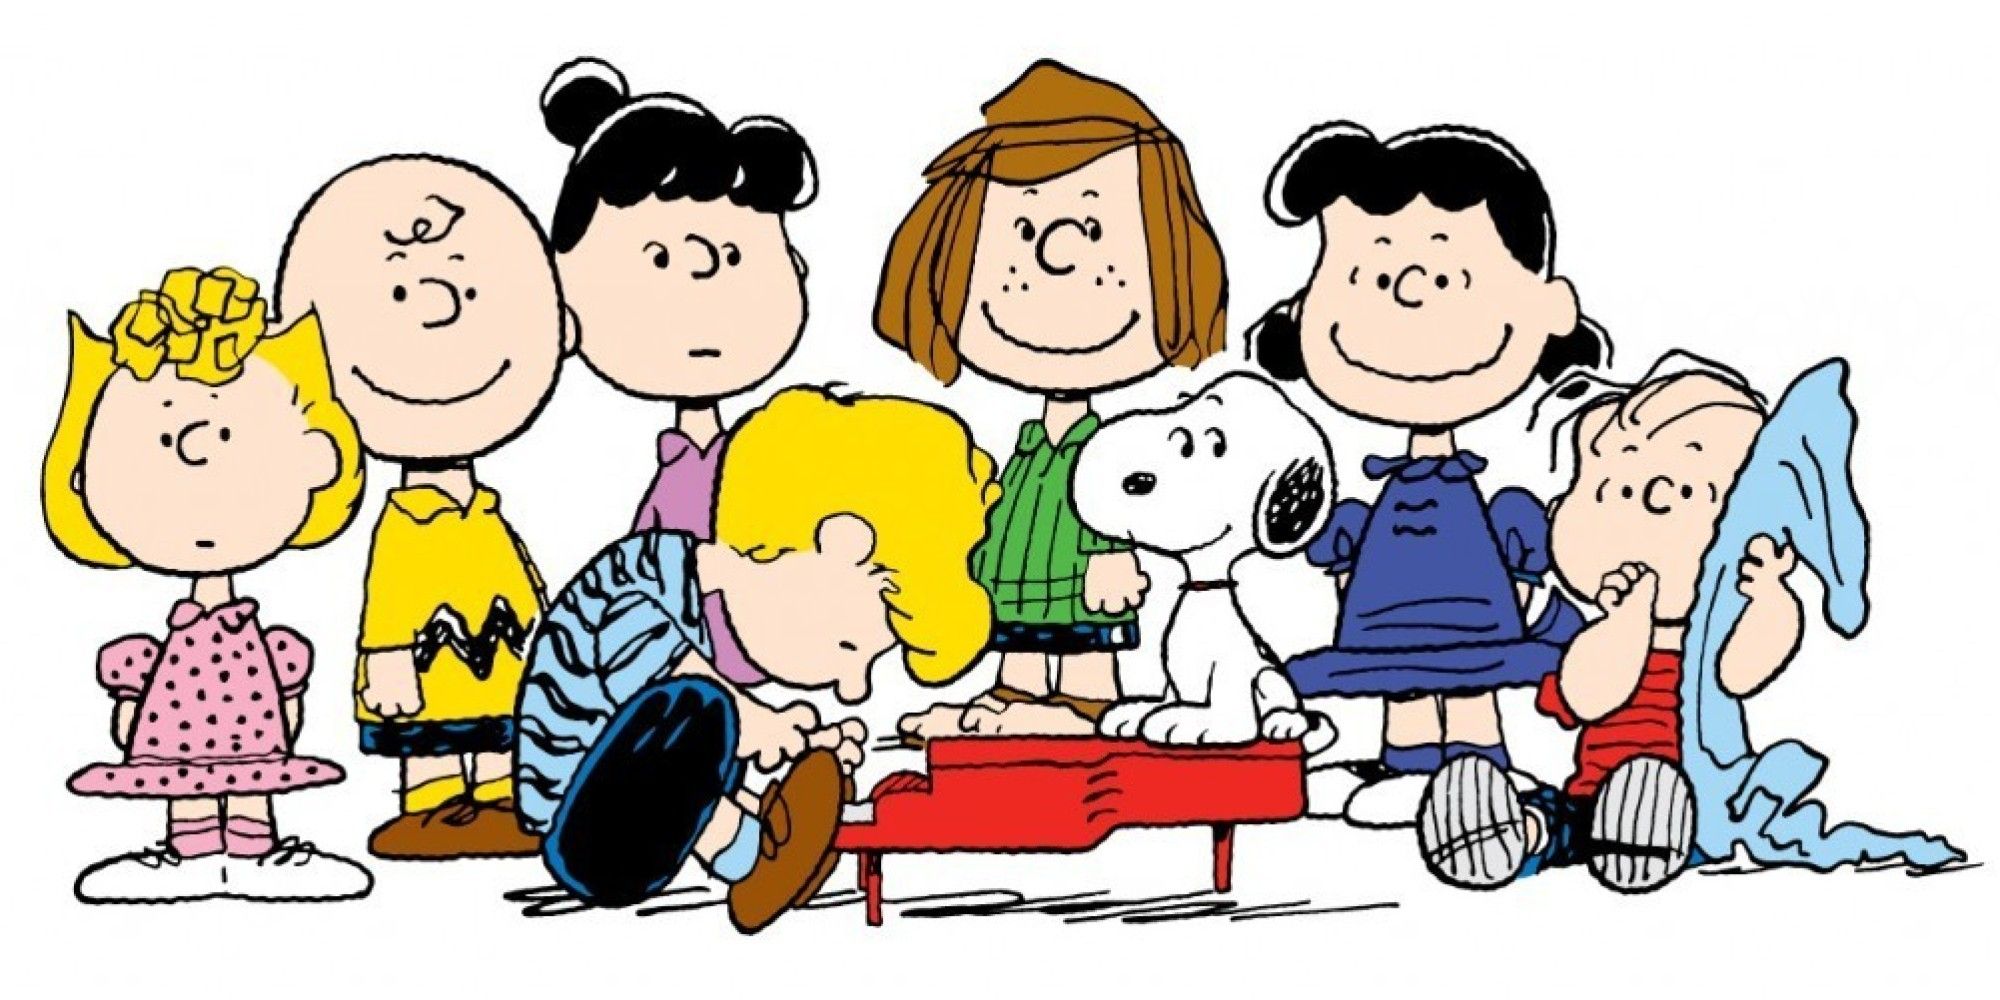 New Charlie Brown Episodes Are Coming to Apple Streaming Service